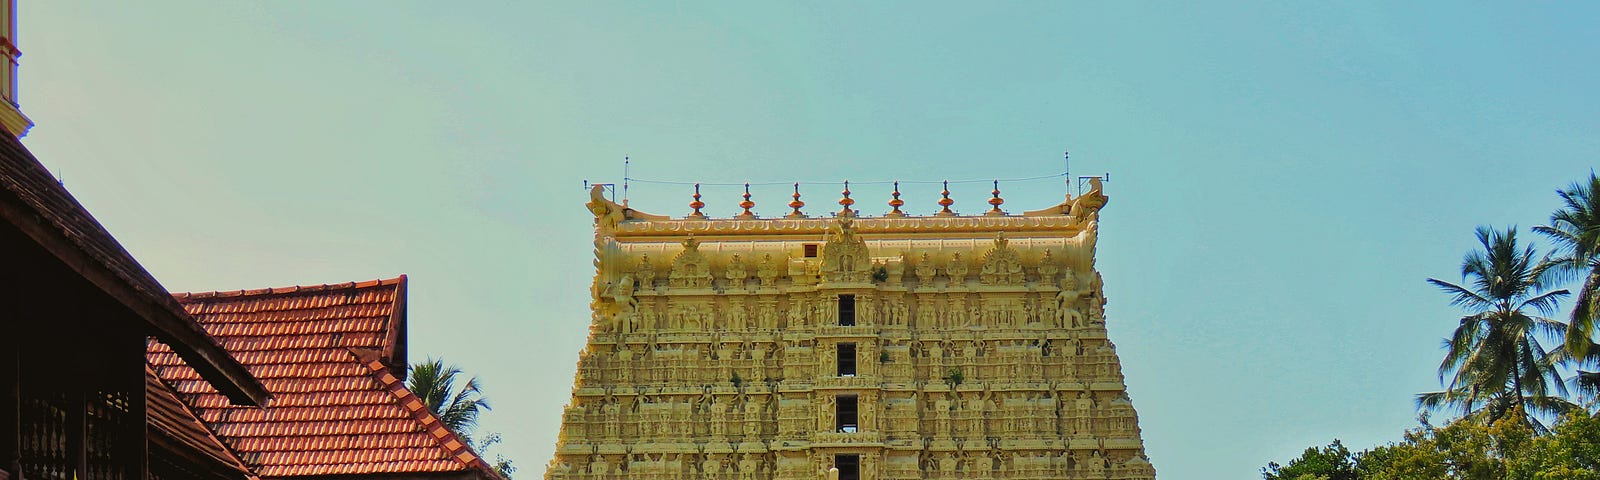 Shri Padmanabhaswamy Temple, adorned with thick plates of gold. Photo by Navaf Muhammed on Unsplash